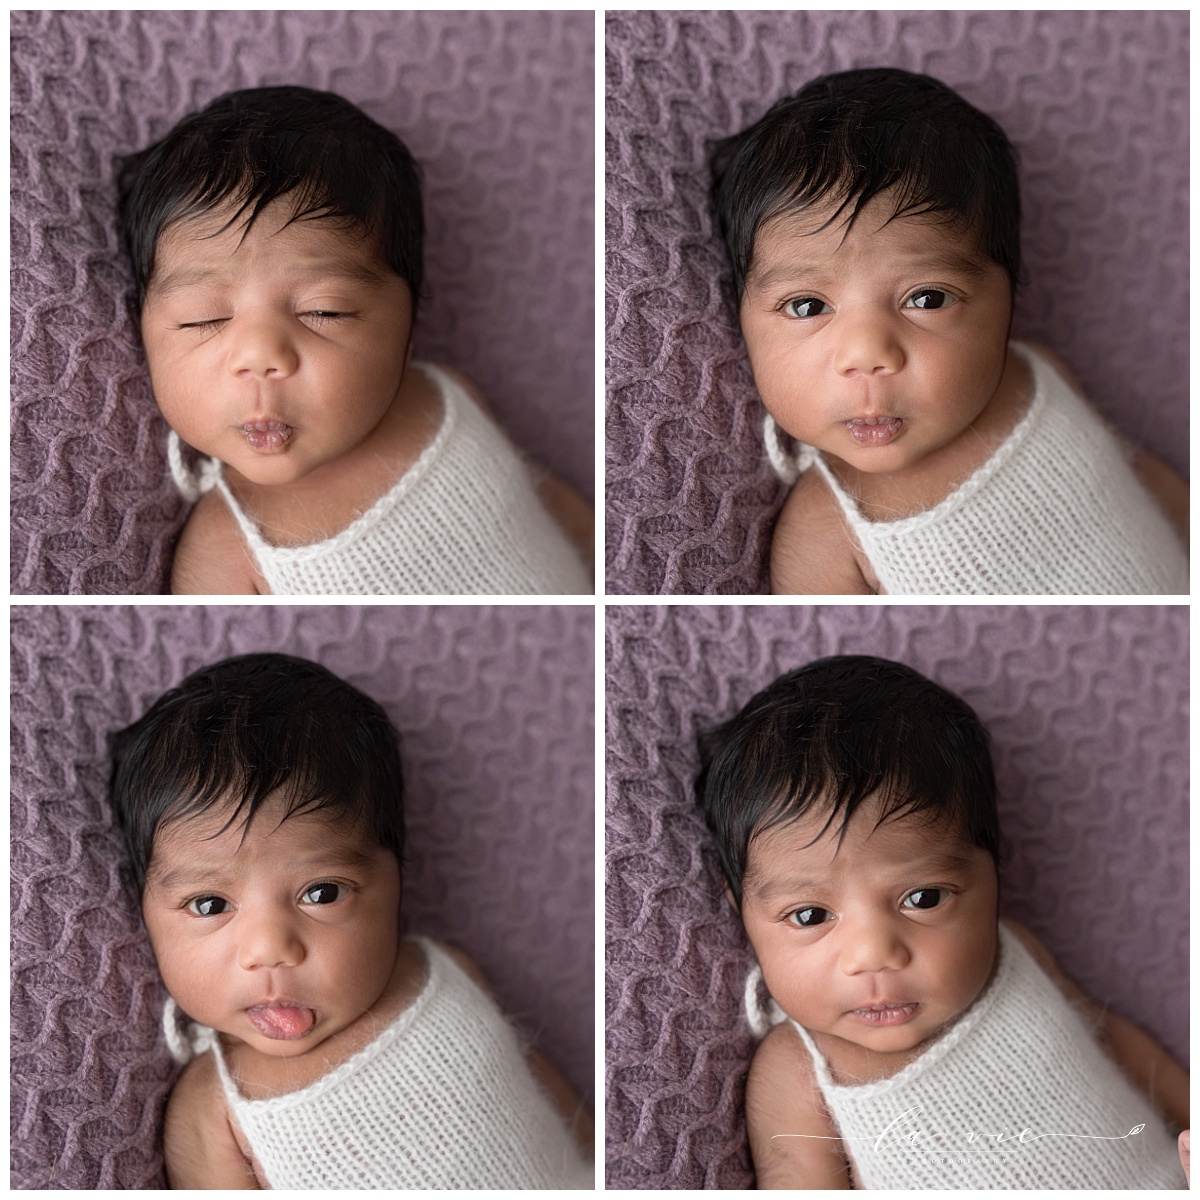 Four image collage of silly newborn faces